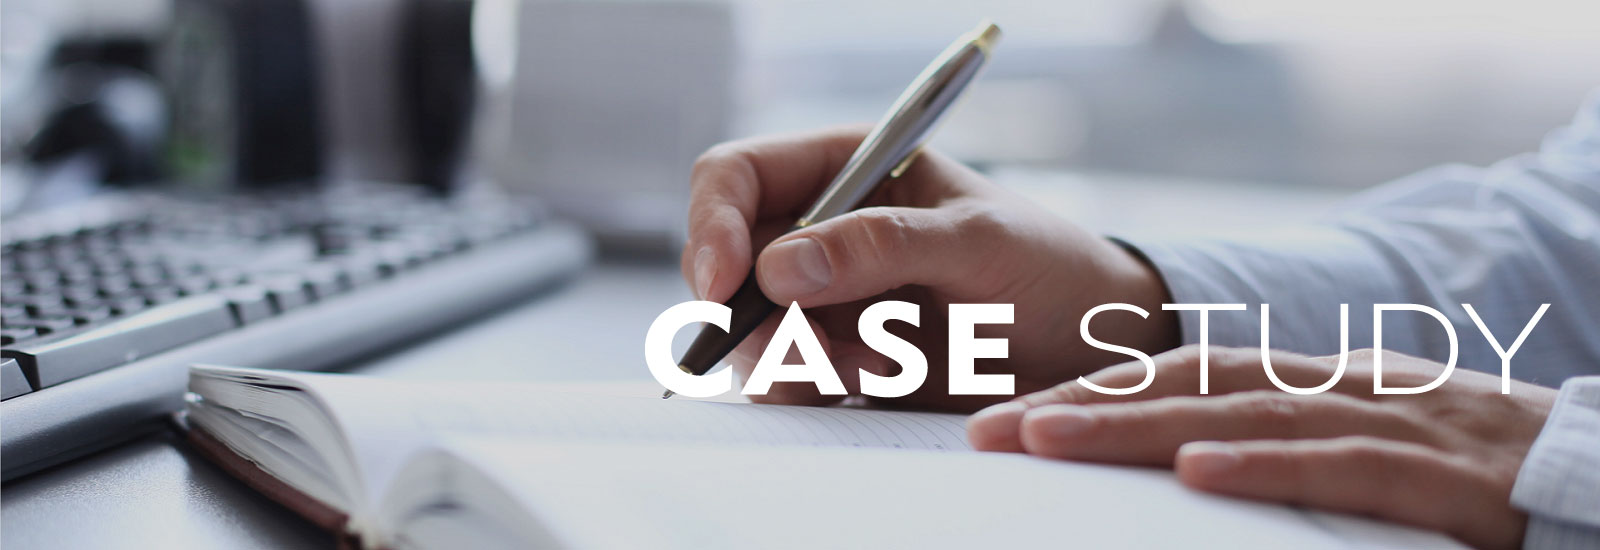 How to write an effective business case study